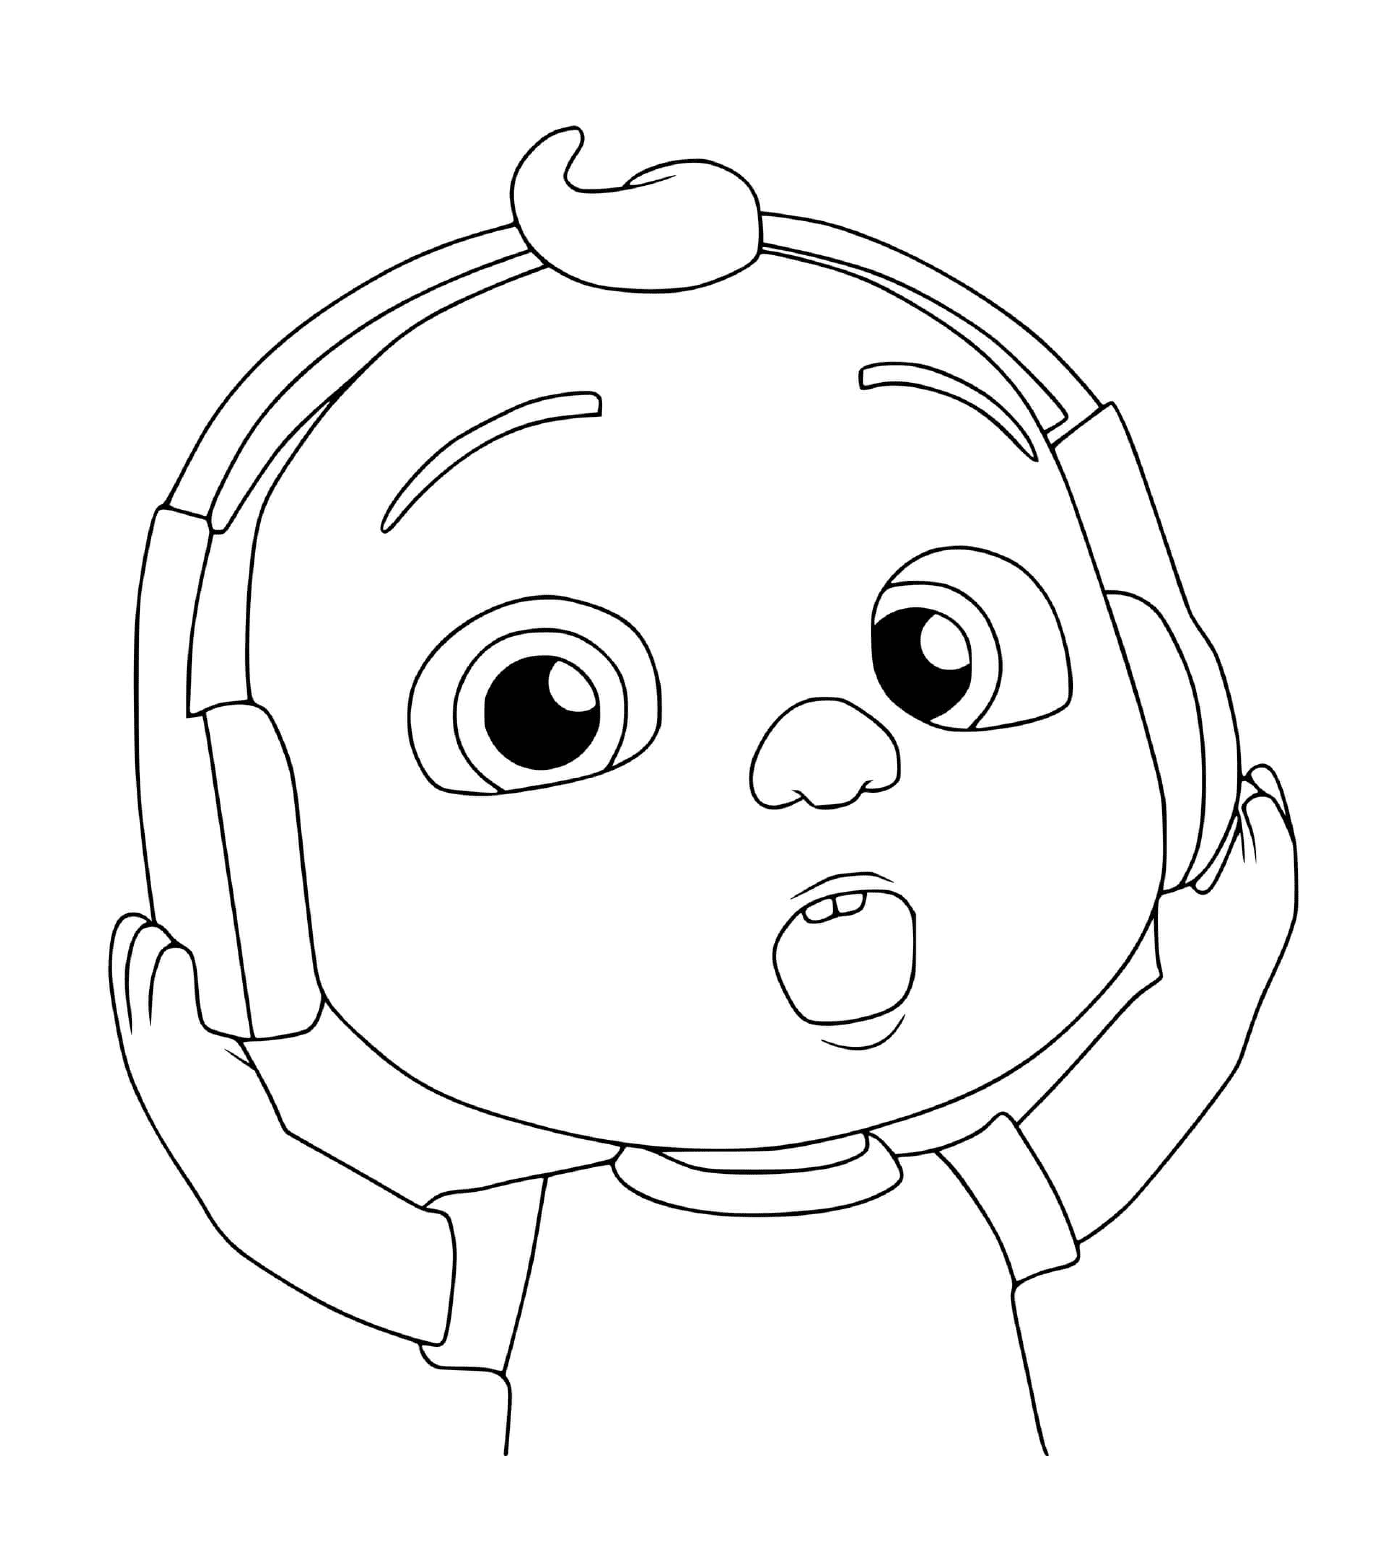  Child of CoComelon hört Musik 